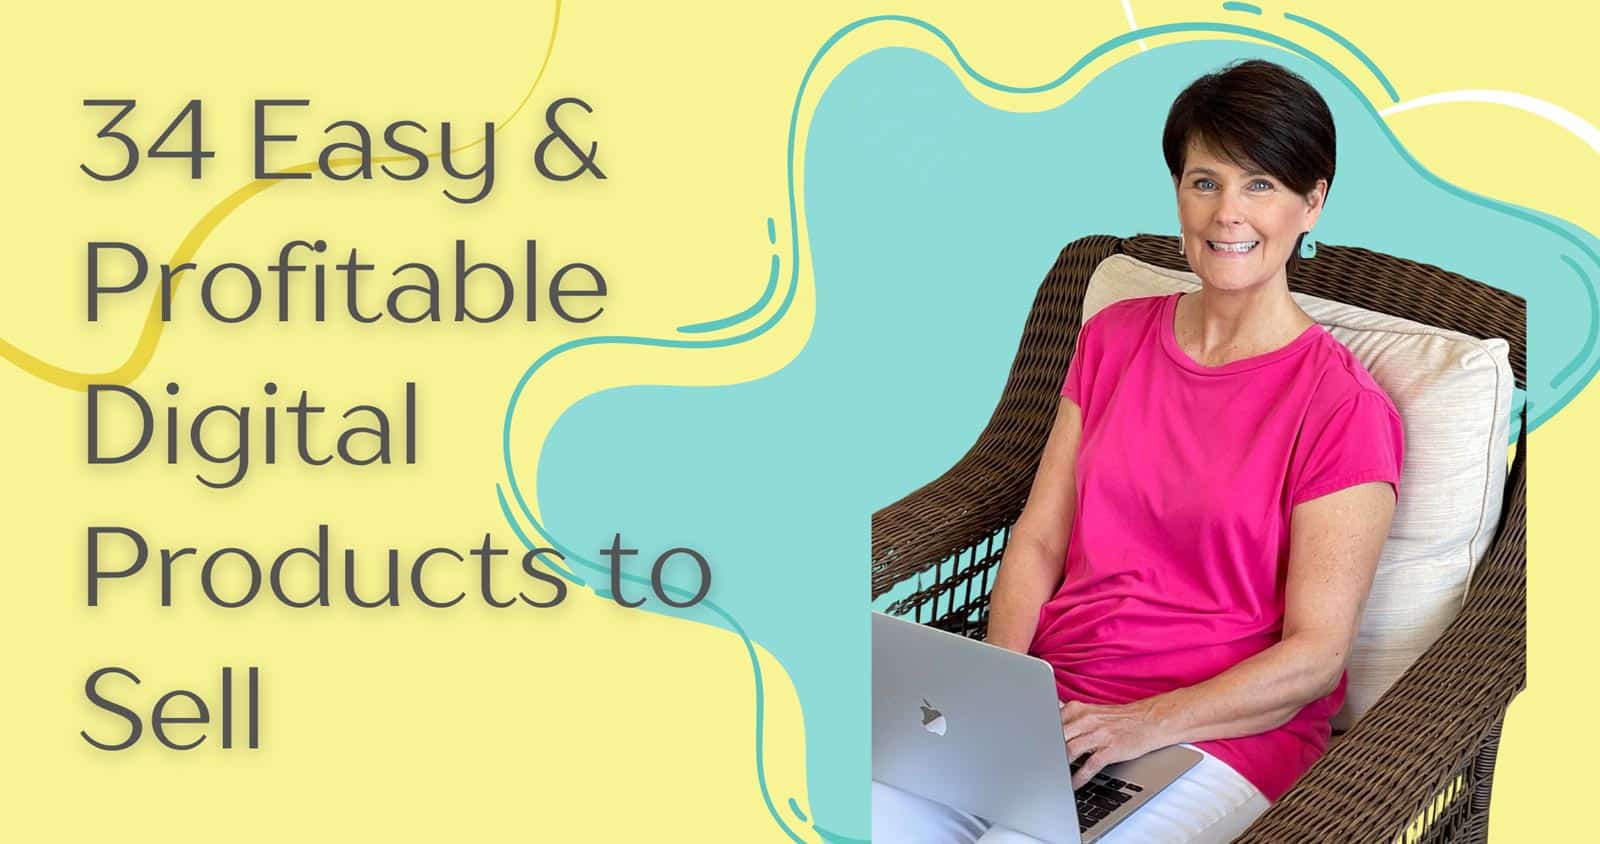 34 Easy & Profitable Digital Products to Sell